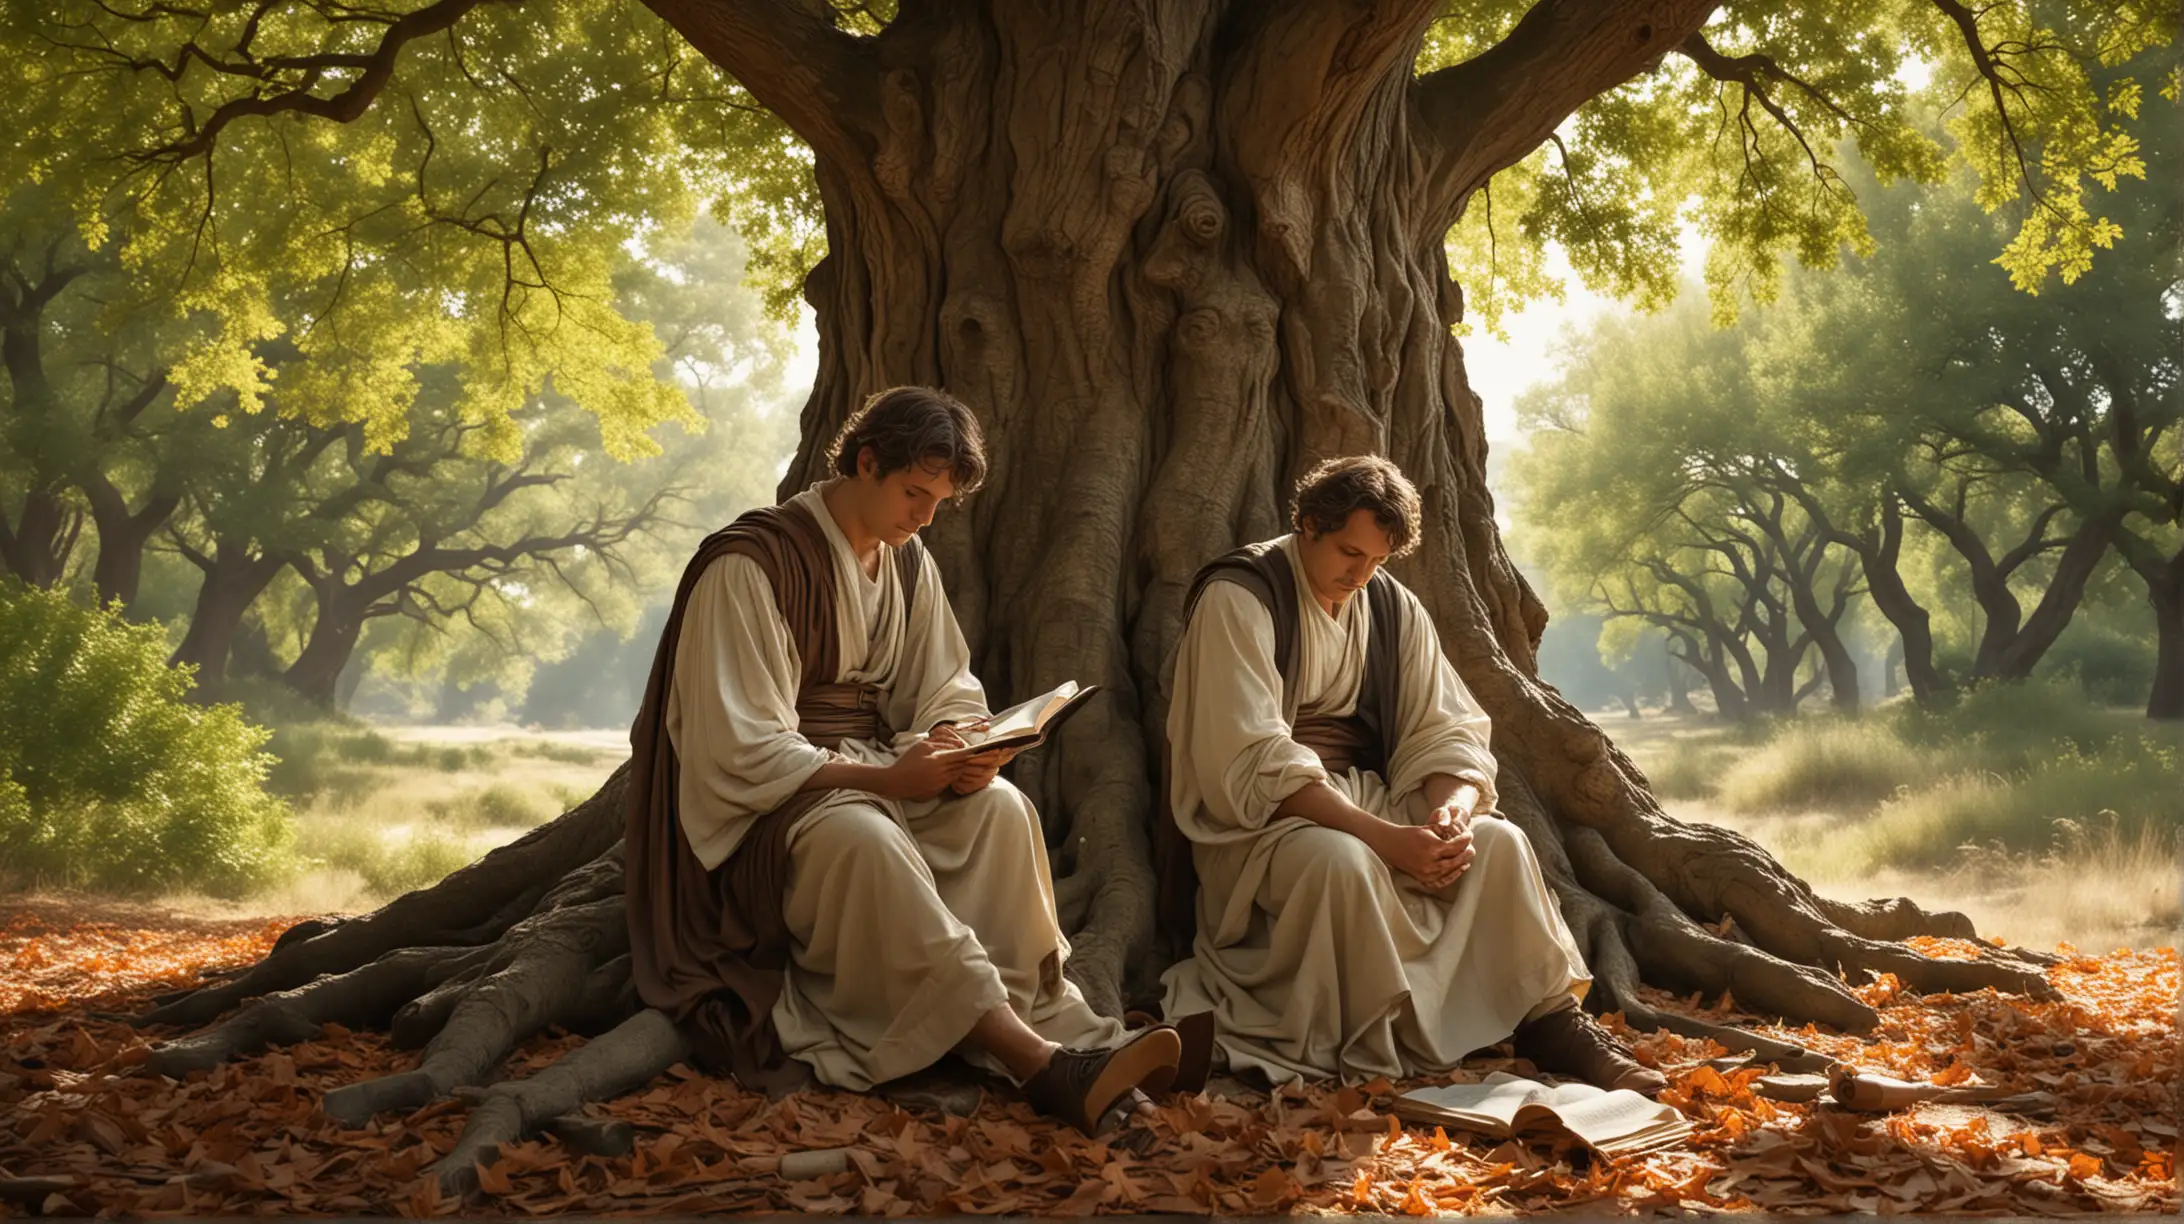 Visualization: Generate an illustration of a philosopher sitting beneath a sprawling oak tree, writing in a leather-bound scroll. His expression is serene, his surroundings imbued with a sense of timeless wisdom and tranquility.
Image Description: In this peaceful woodland scene, we see a Greek philosopher seated beneath a majestic oak tree, his lean and muscular form hunched over a leather-bound scroll. The dappled sunlight filters through the leaves, casting a gentle glow on his serene expression as he pens Stoic insights into the nature of human connections and the pursuit of virtue.